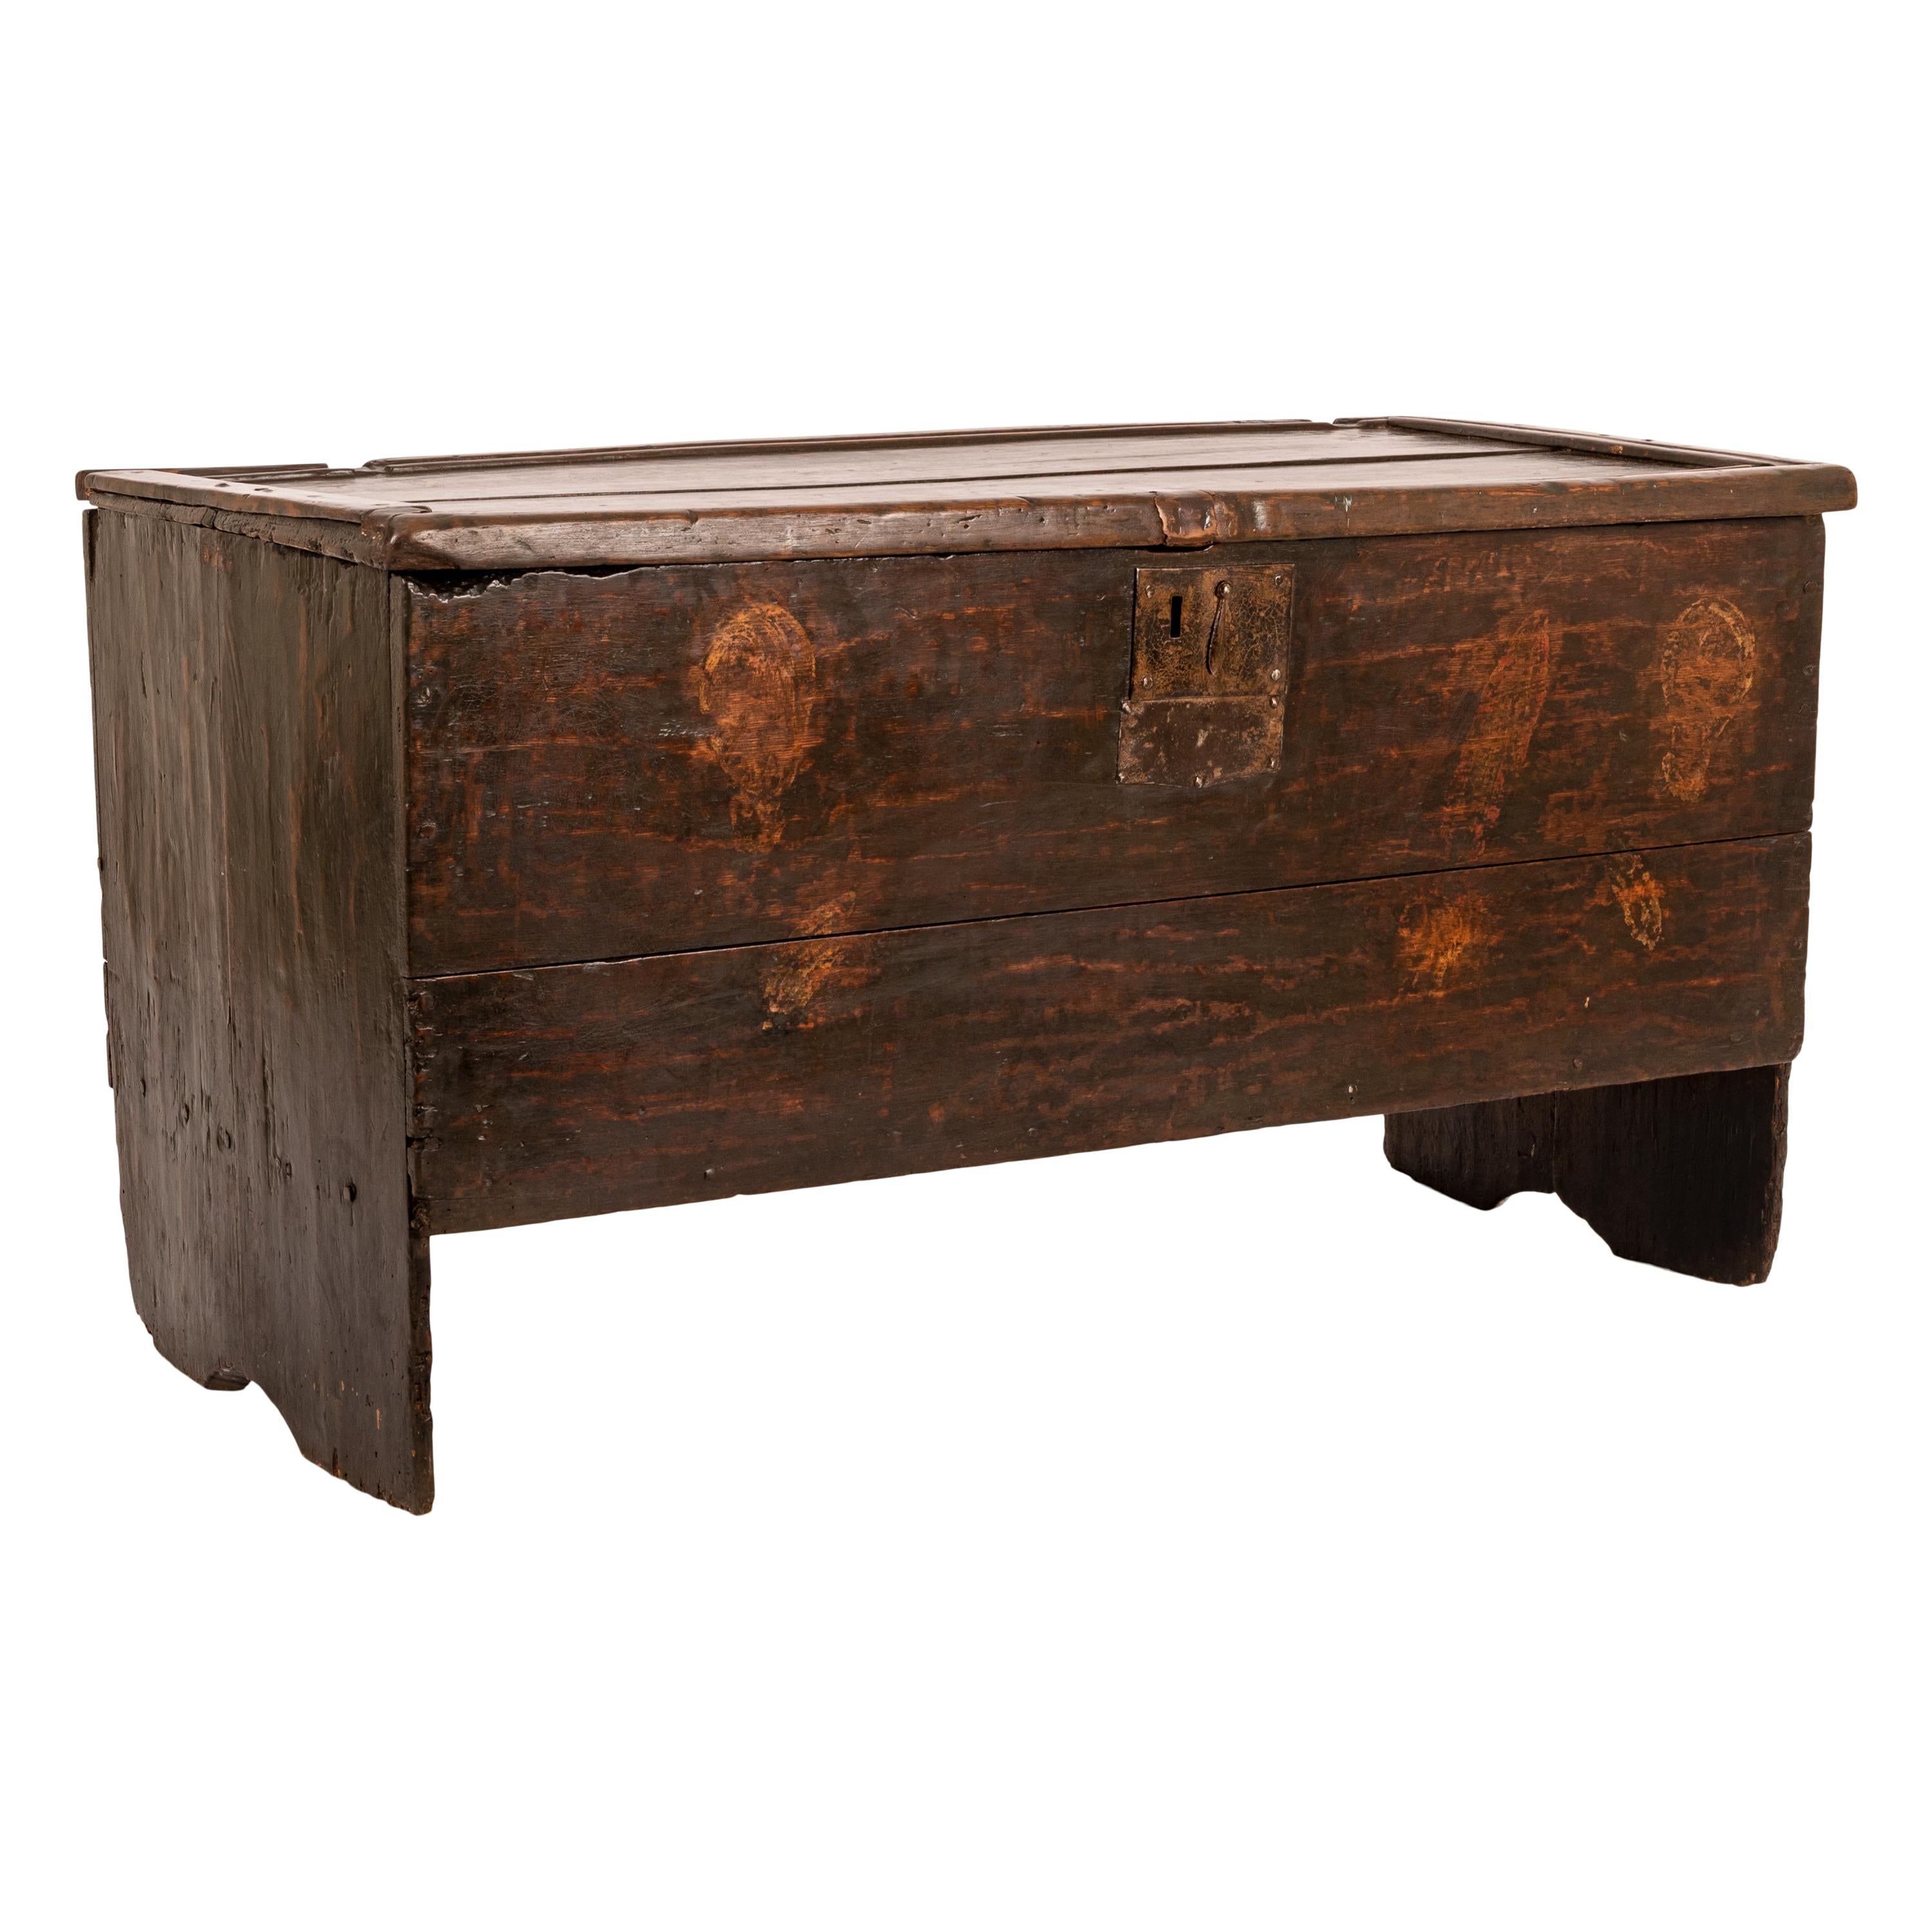 Antique Tudor/Elizabethan oak six plank boarded coffer/sword chest, circa 1540.
The coffer from the period of King Henry VIII having a hinged lid enclosing a storage area lined with 19th century newspapers, the sides, rear and base all of joined